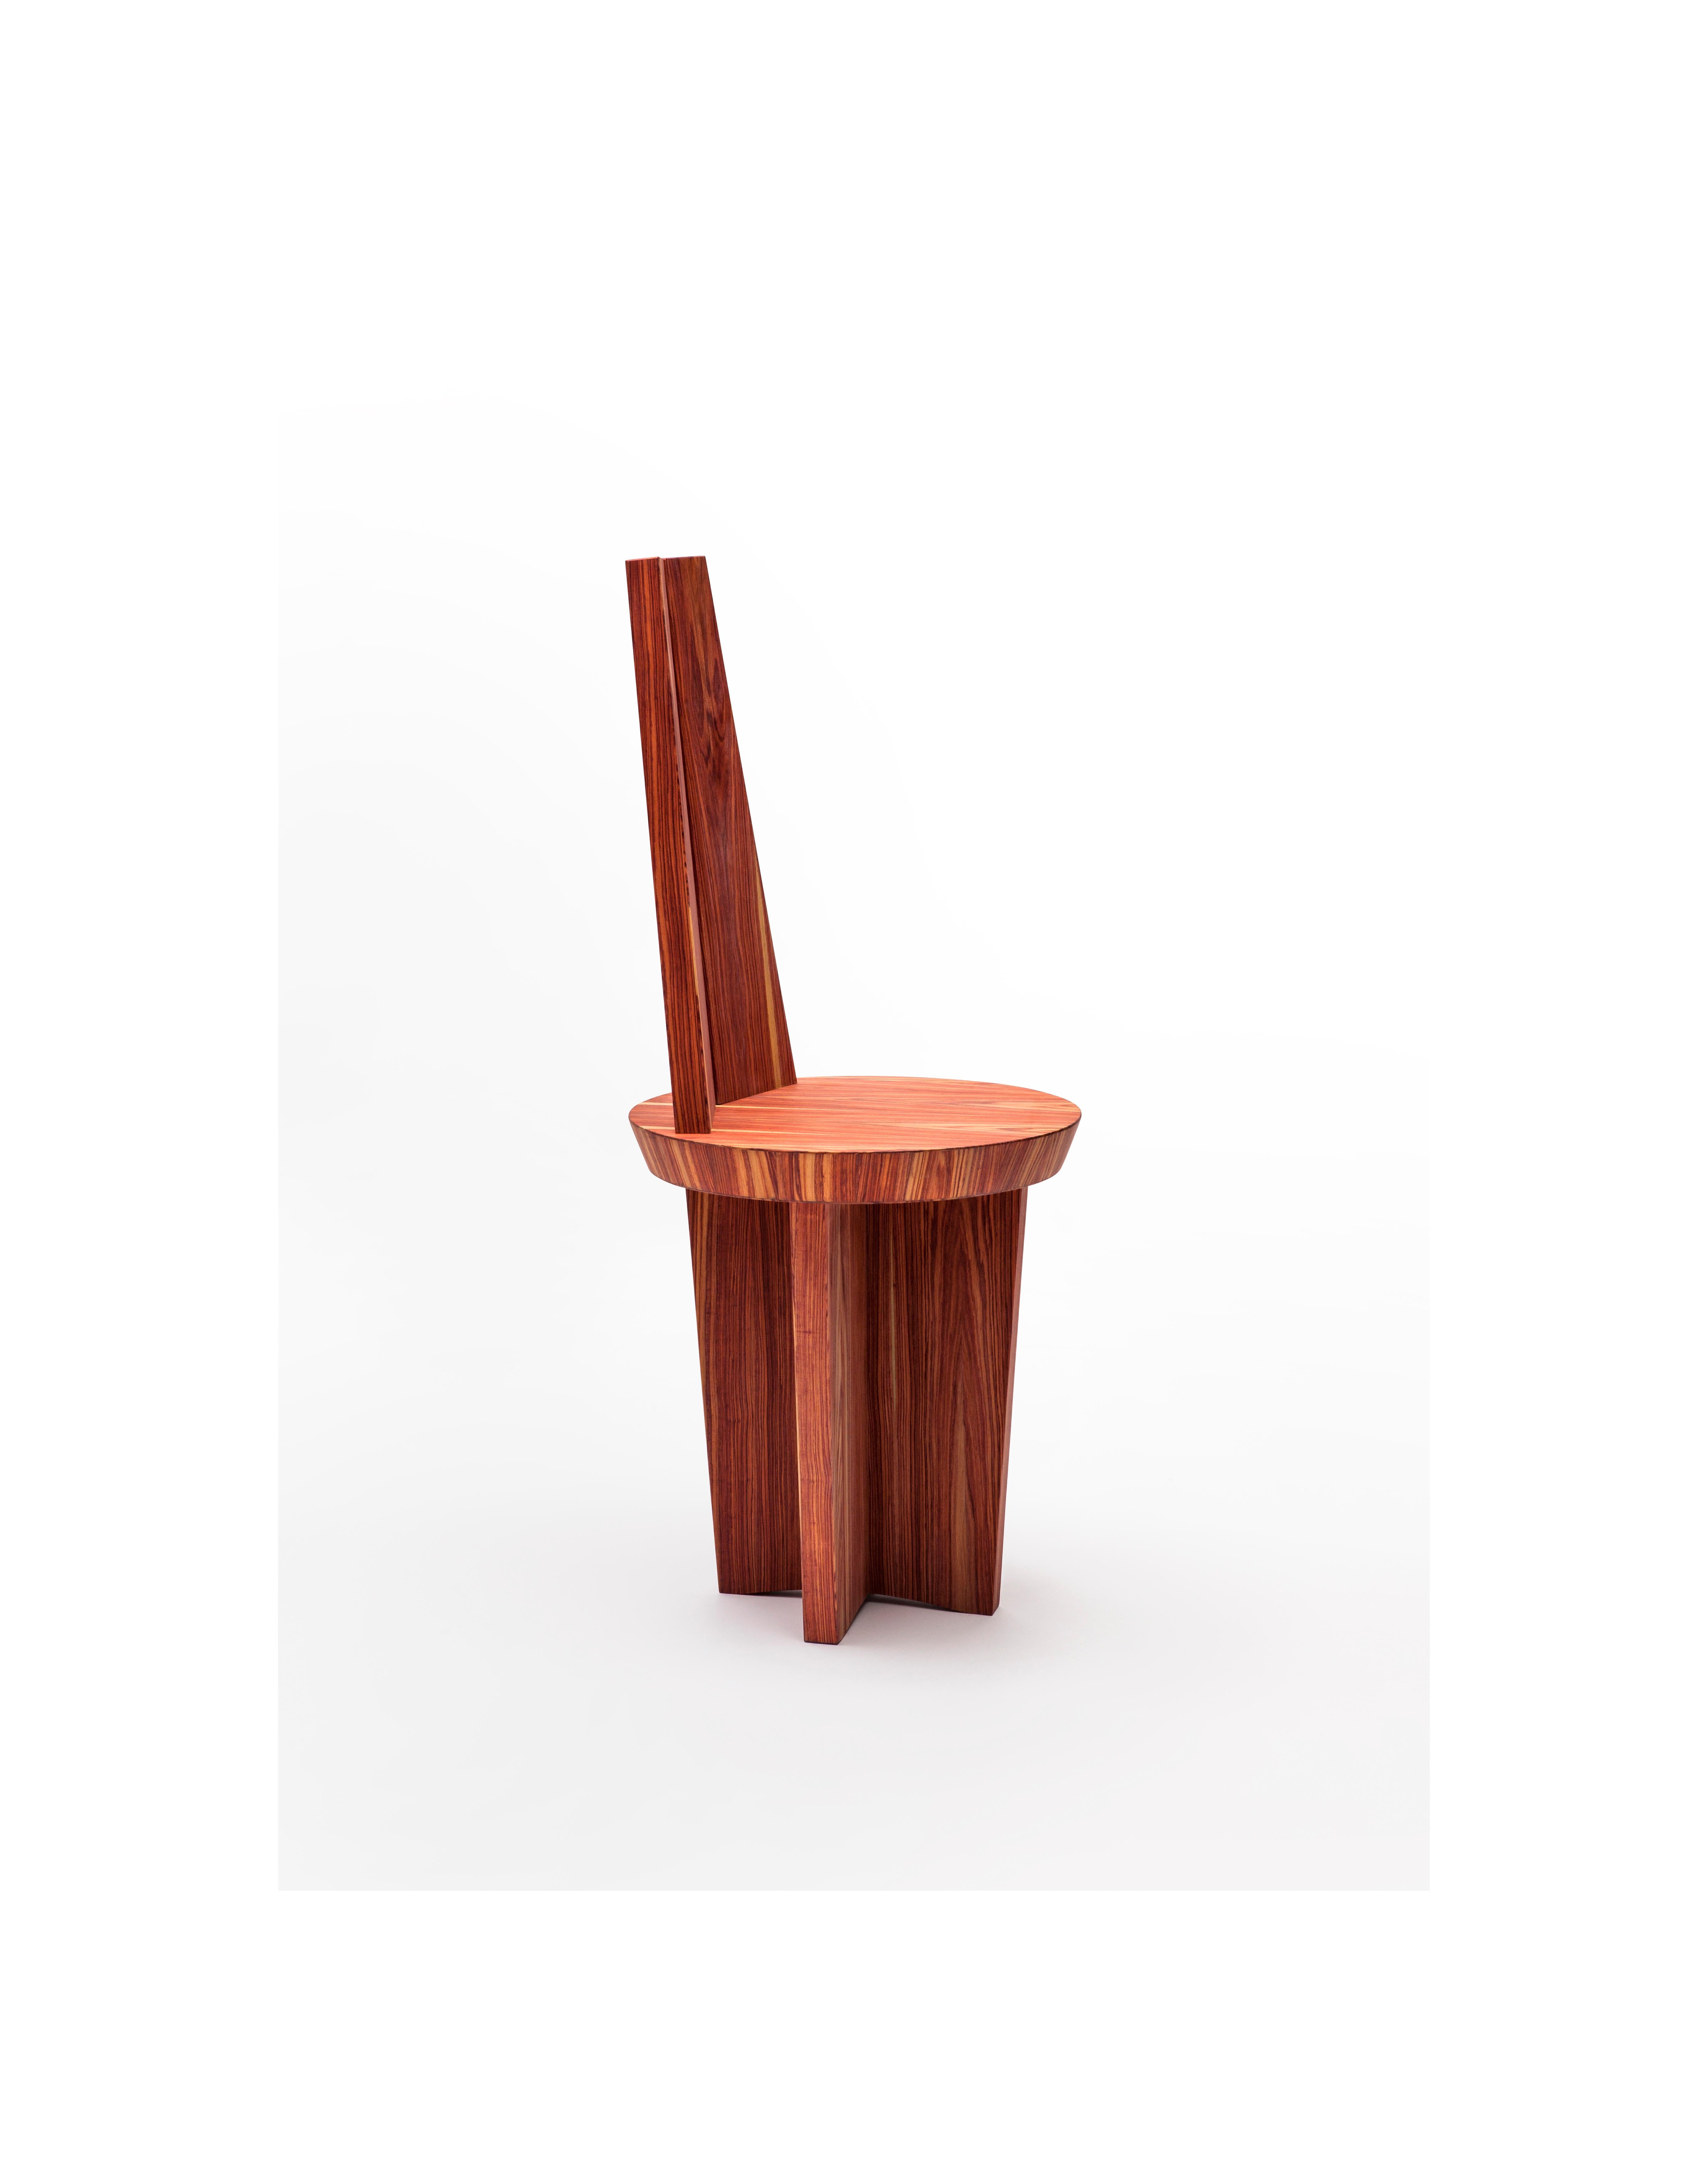 Contemporary Rosewood & Copper Povera Chair by Antonio Aricò for Delvis Unlimited For Sale